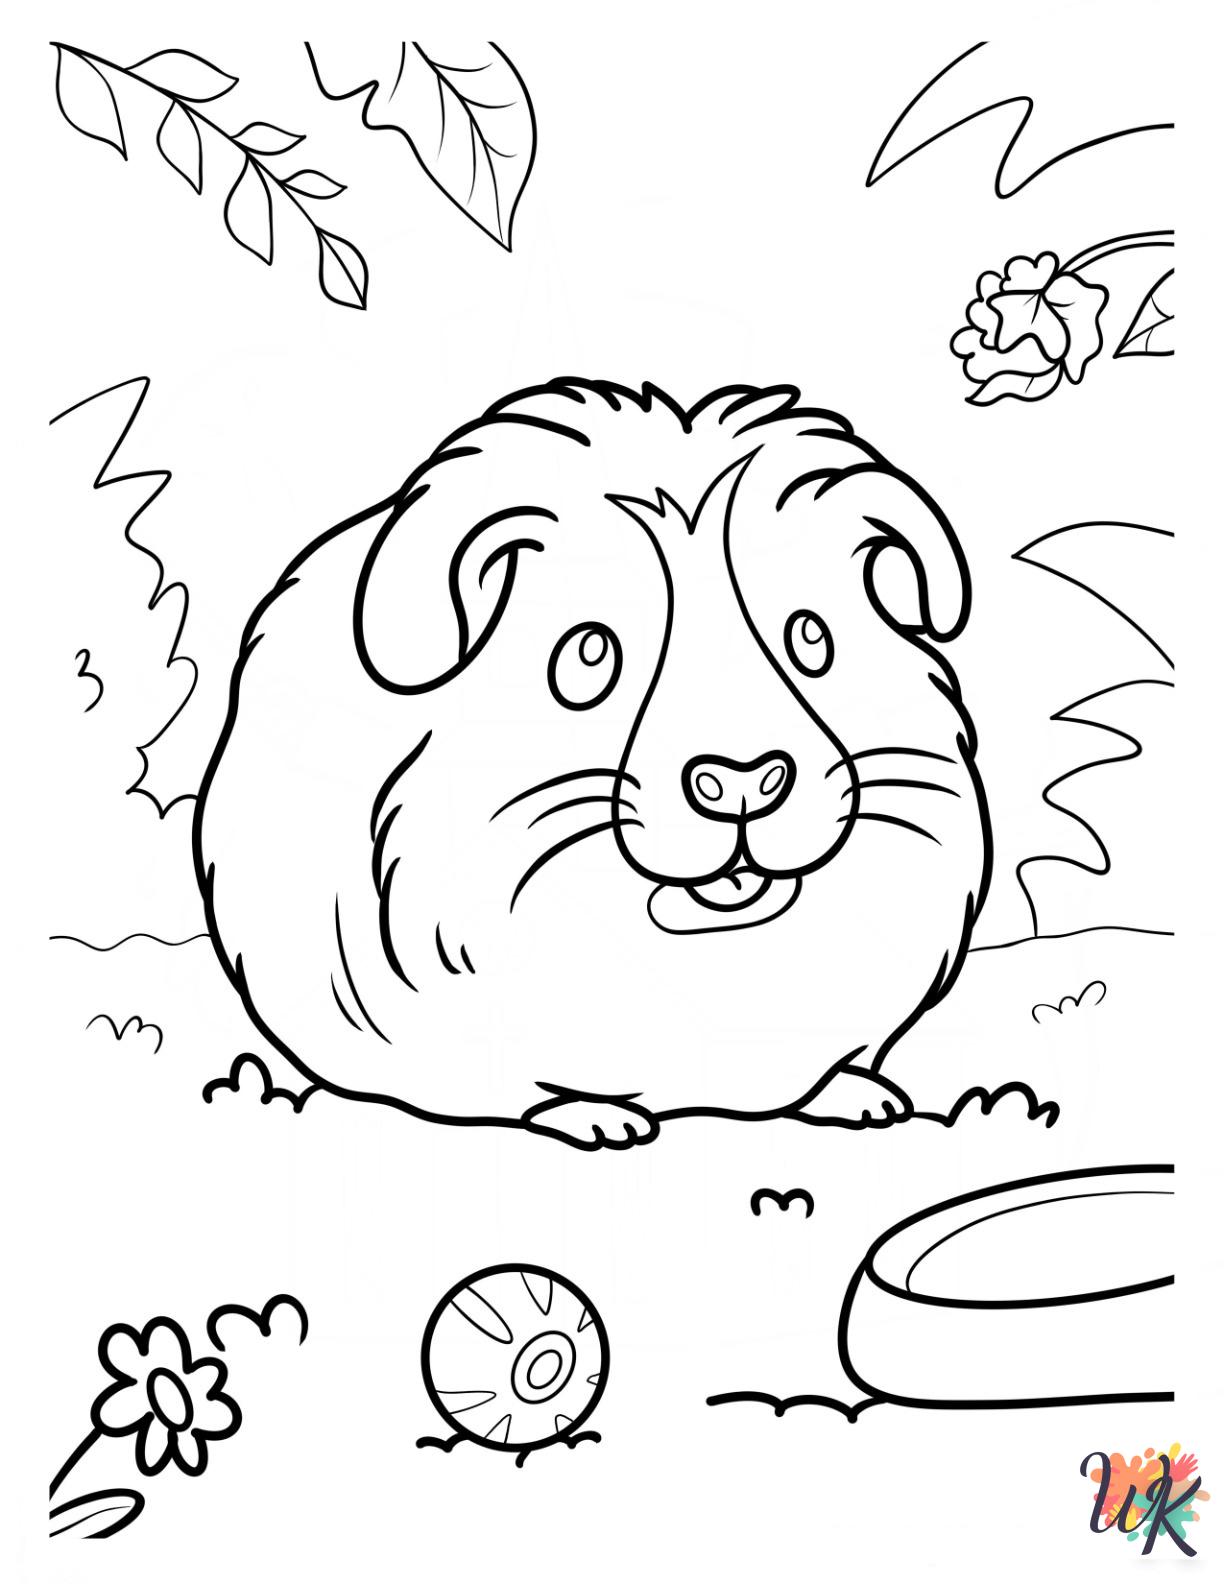 Guinea Pig ornaments coloring pages